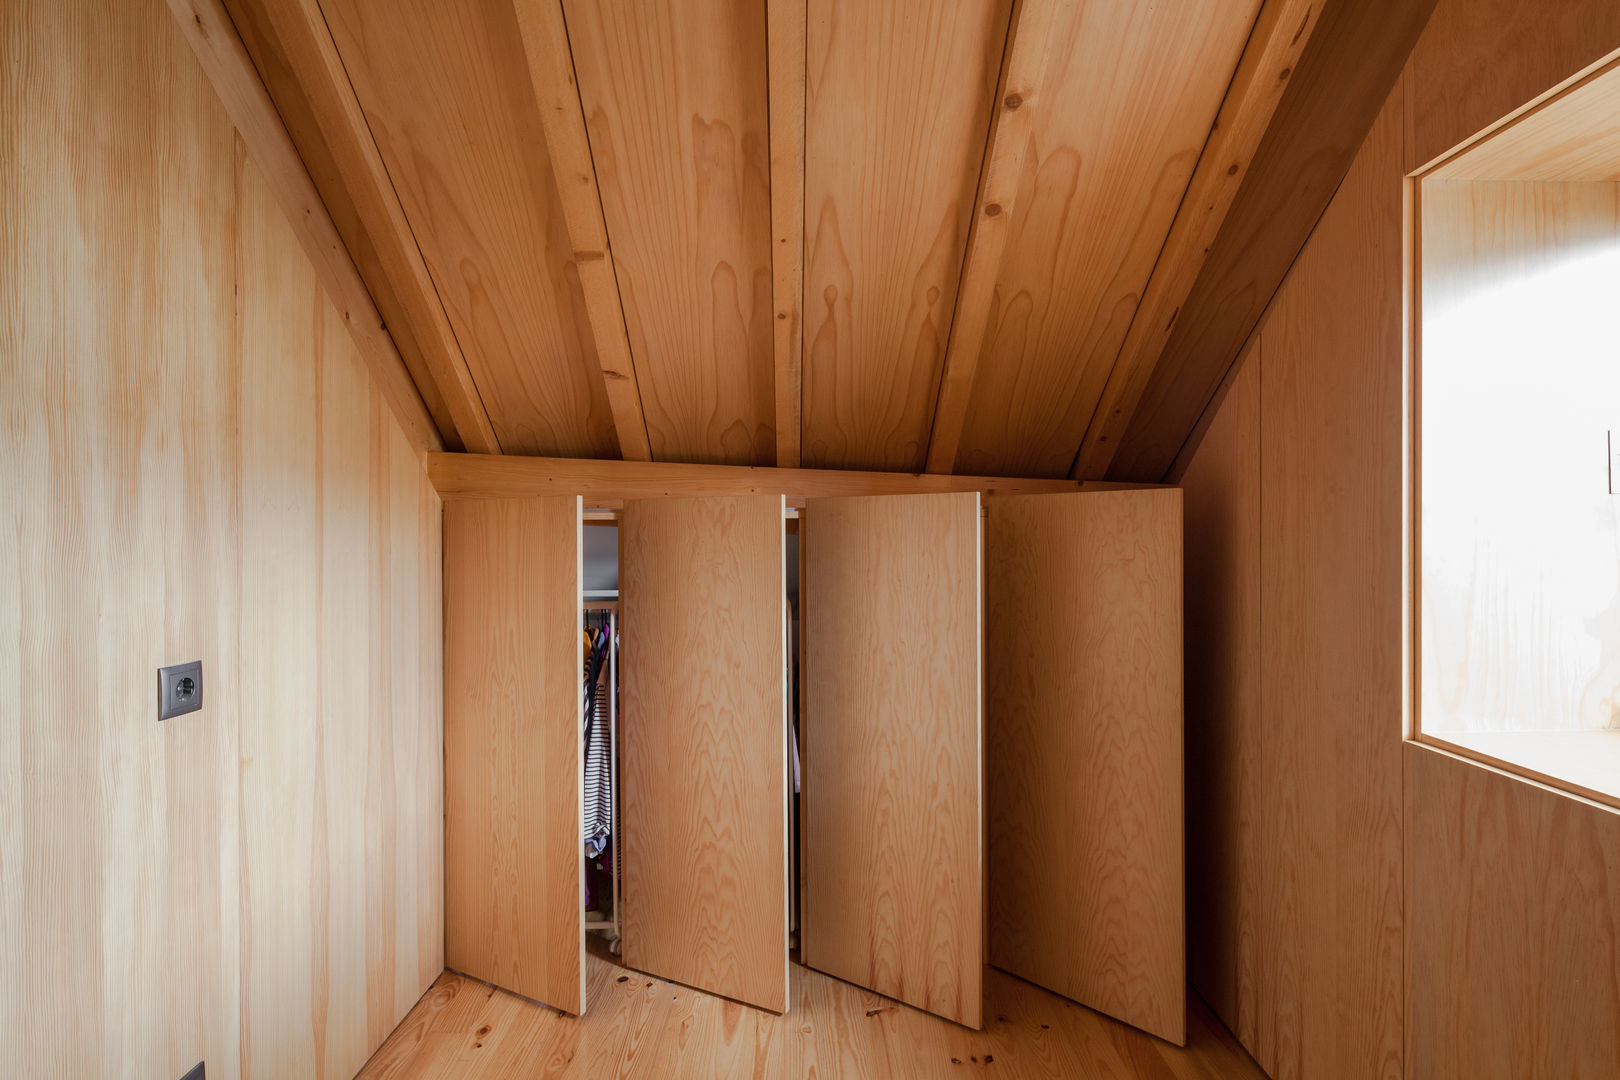 The Three Cusps Chalet, Tiago do Vale Arquitectos Tiago do Vale Arquitectos Spogliatoio eclettico